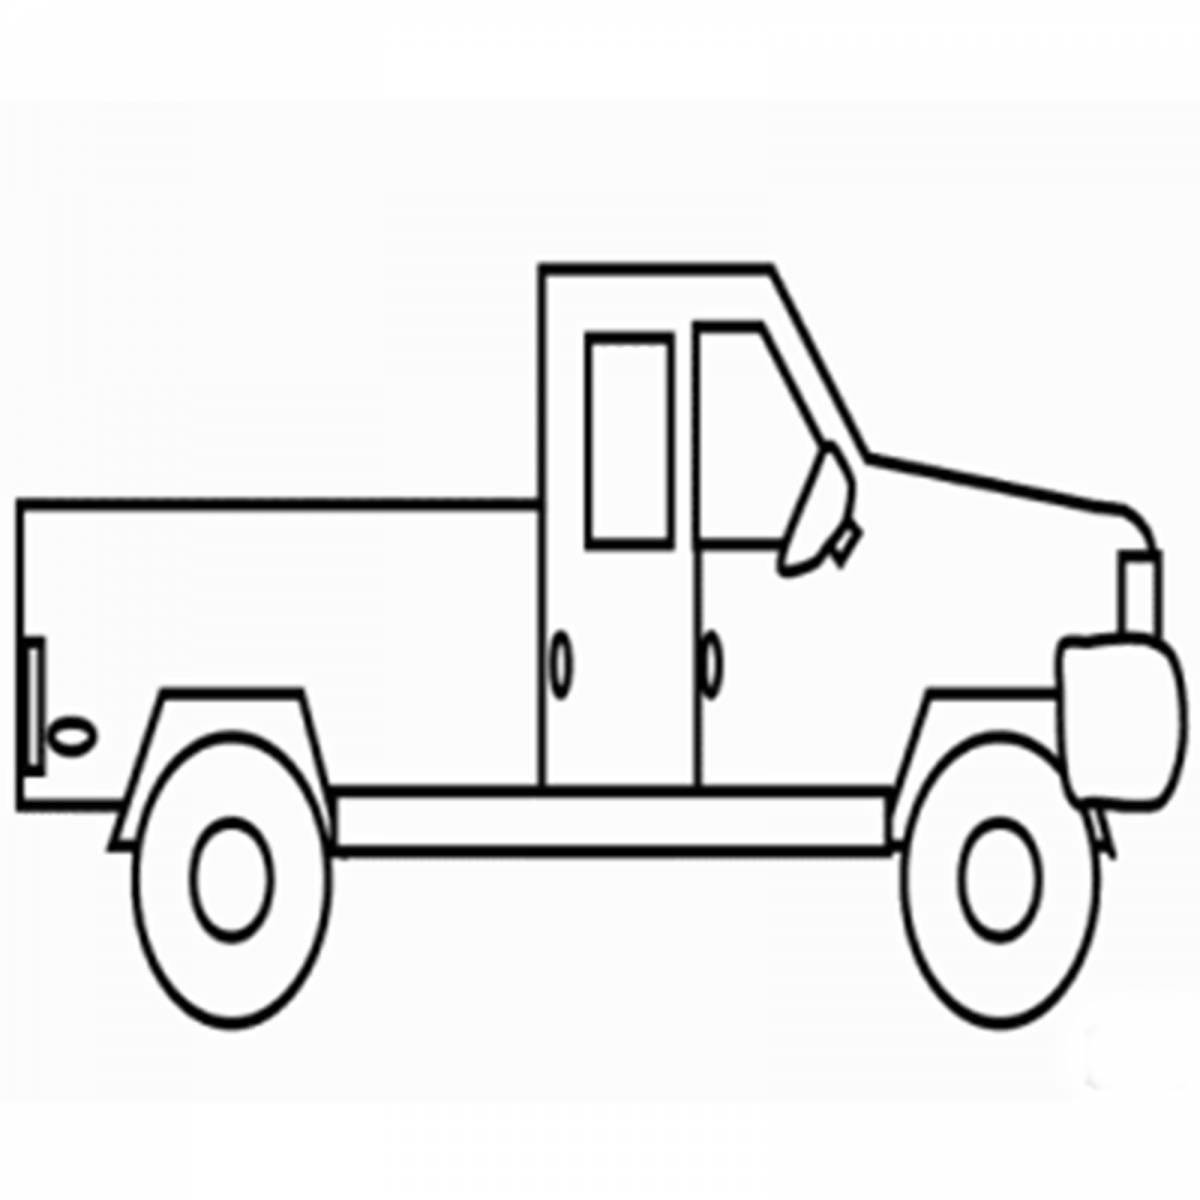 Playful military truck coloring page for kids